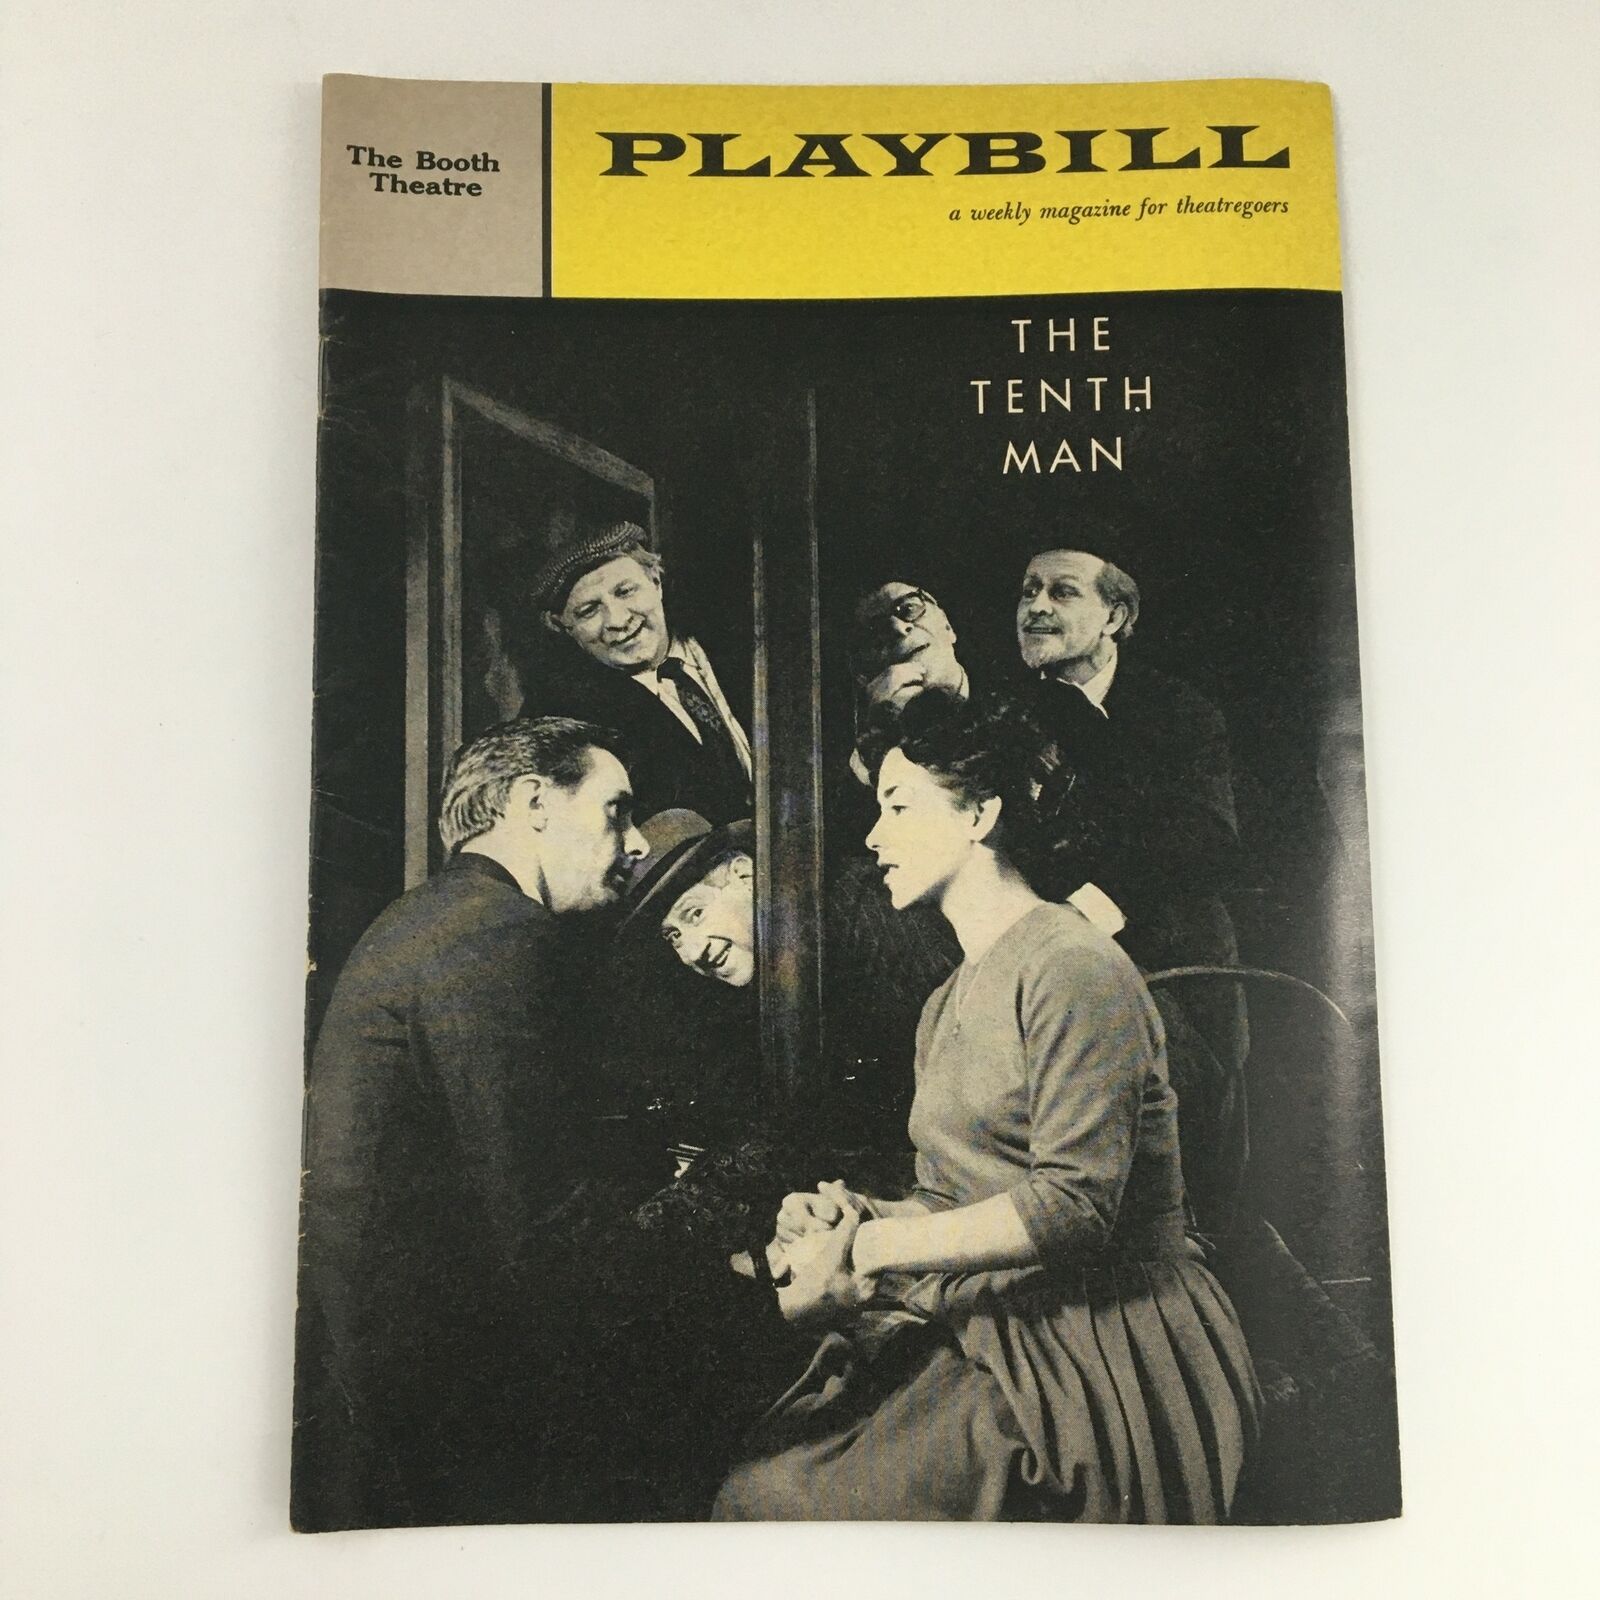 1960 Playbill The Special Max 55% OFF price Booth Theatre 'The Man' J Donald Harron Tenth